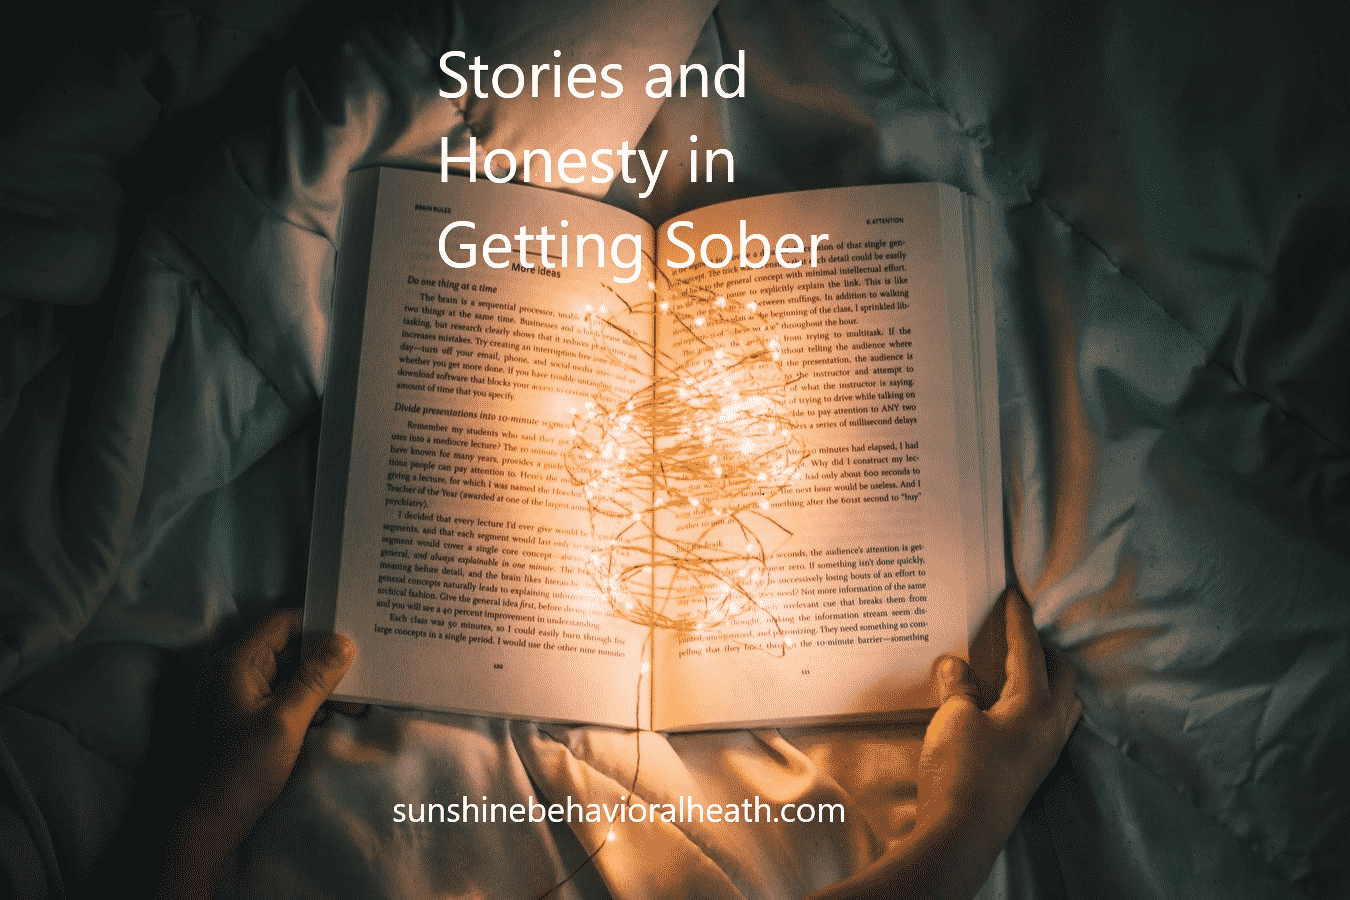 Stories and Honesty in Getting Sober